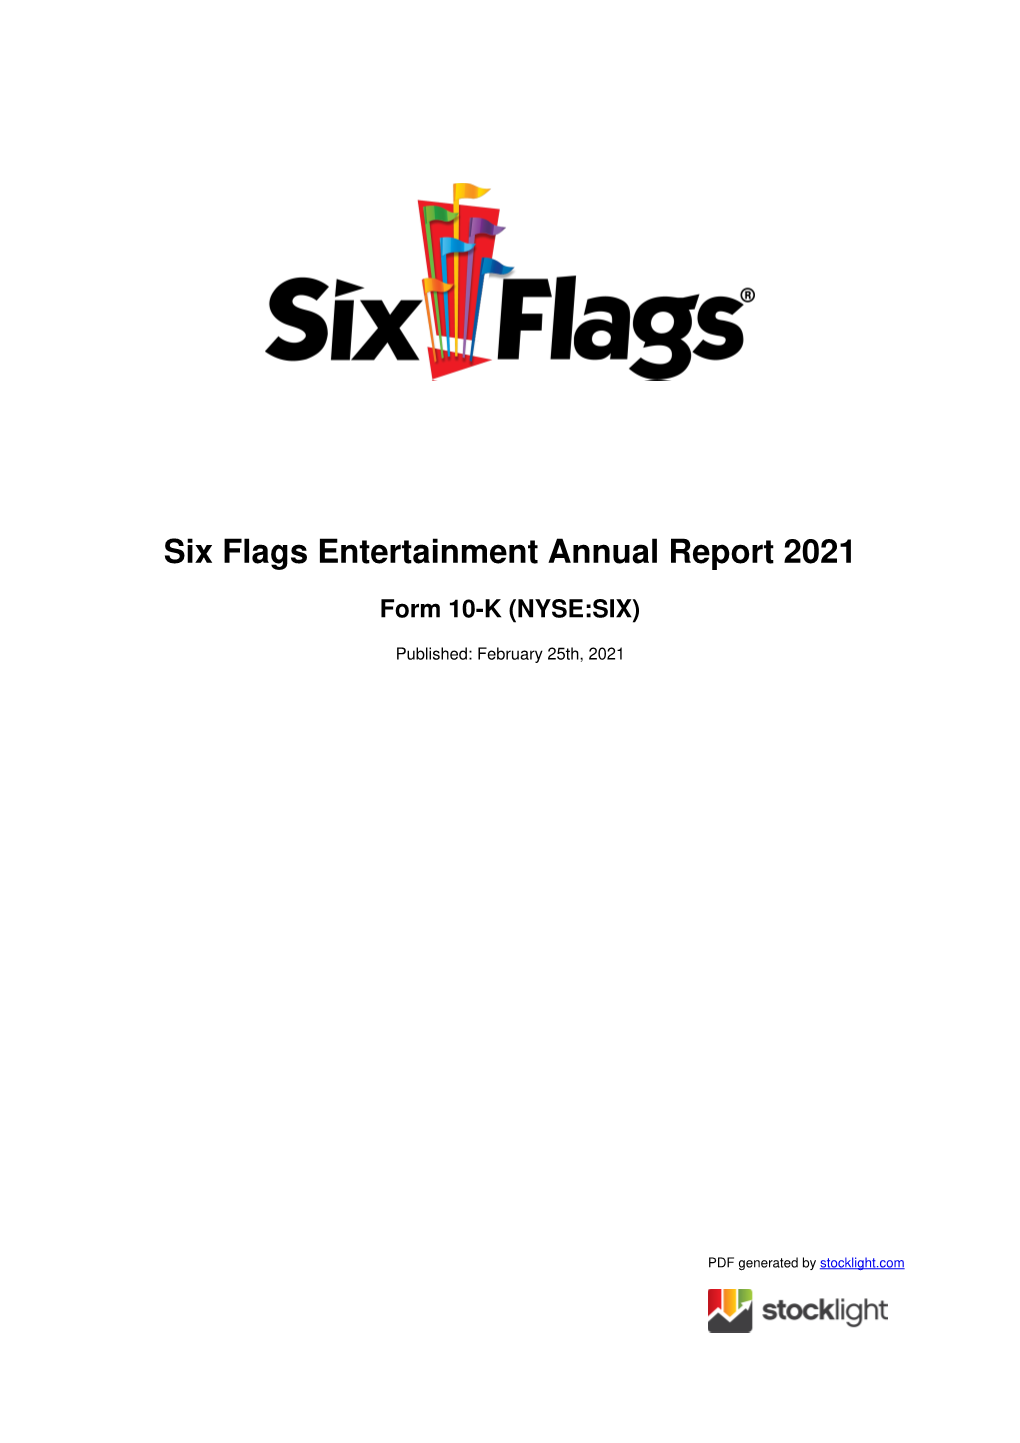 Six Flags Entertainment Annual Report 2021